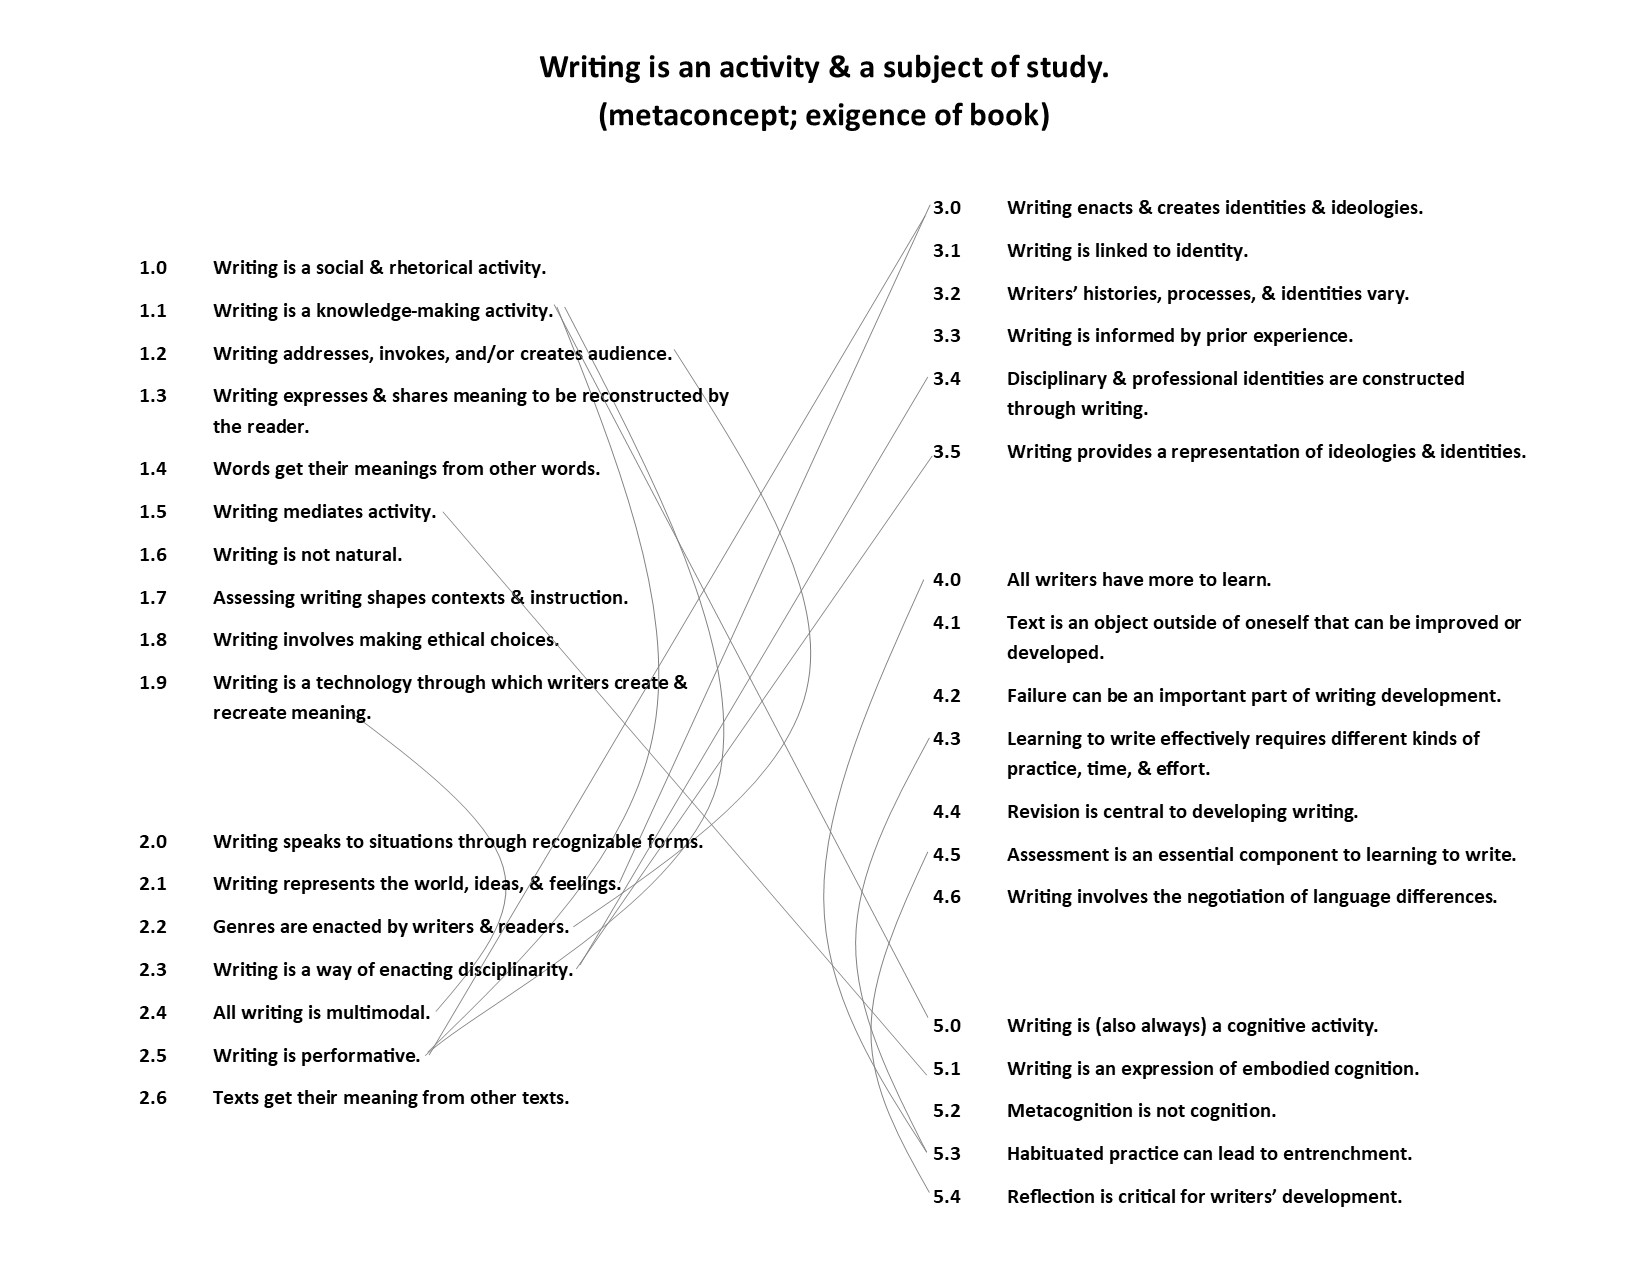 Map of threshold concepts of
              writing studies that lists chapter titles from the book
              with lines drawn to show connections between different
              chapters and threshold concepts.